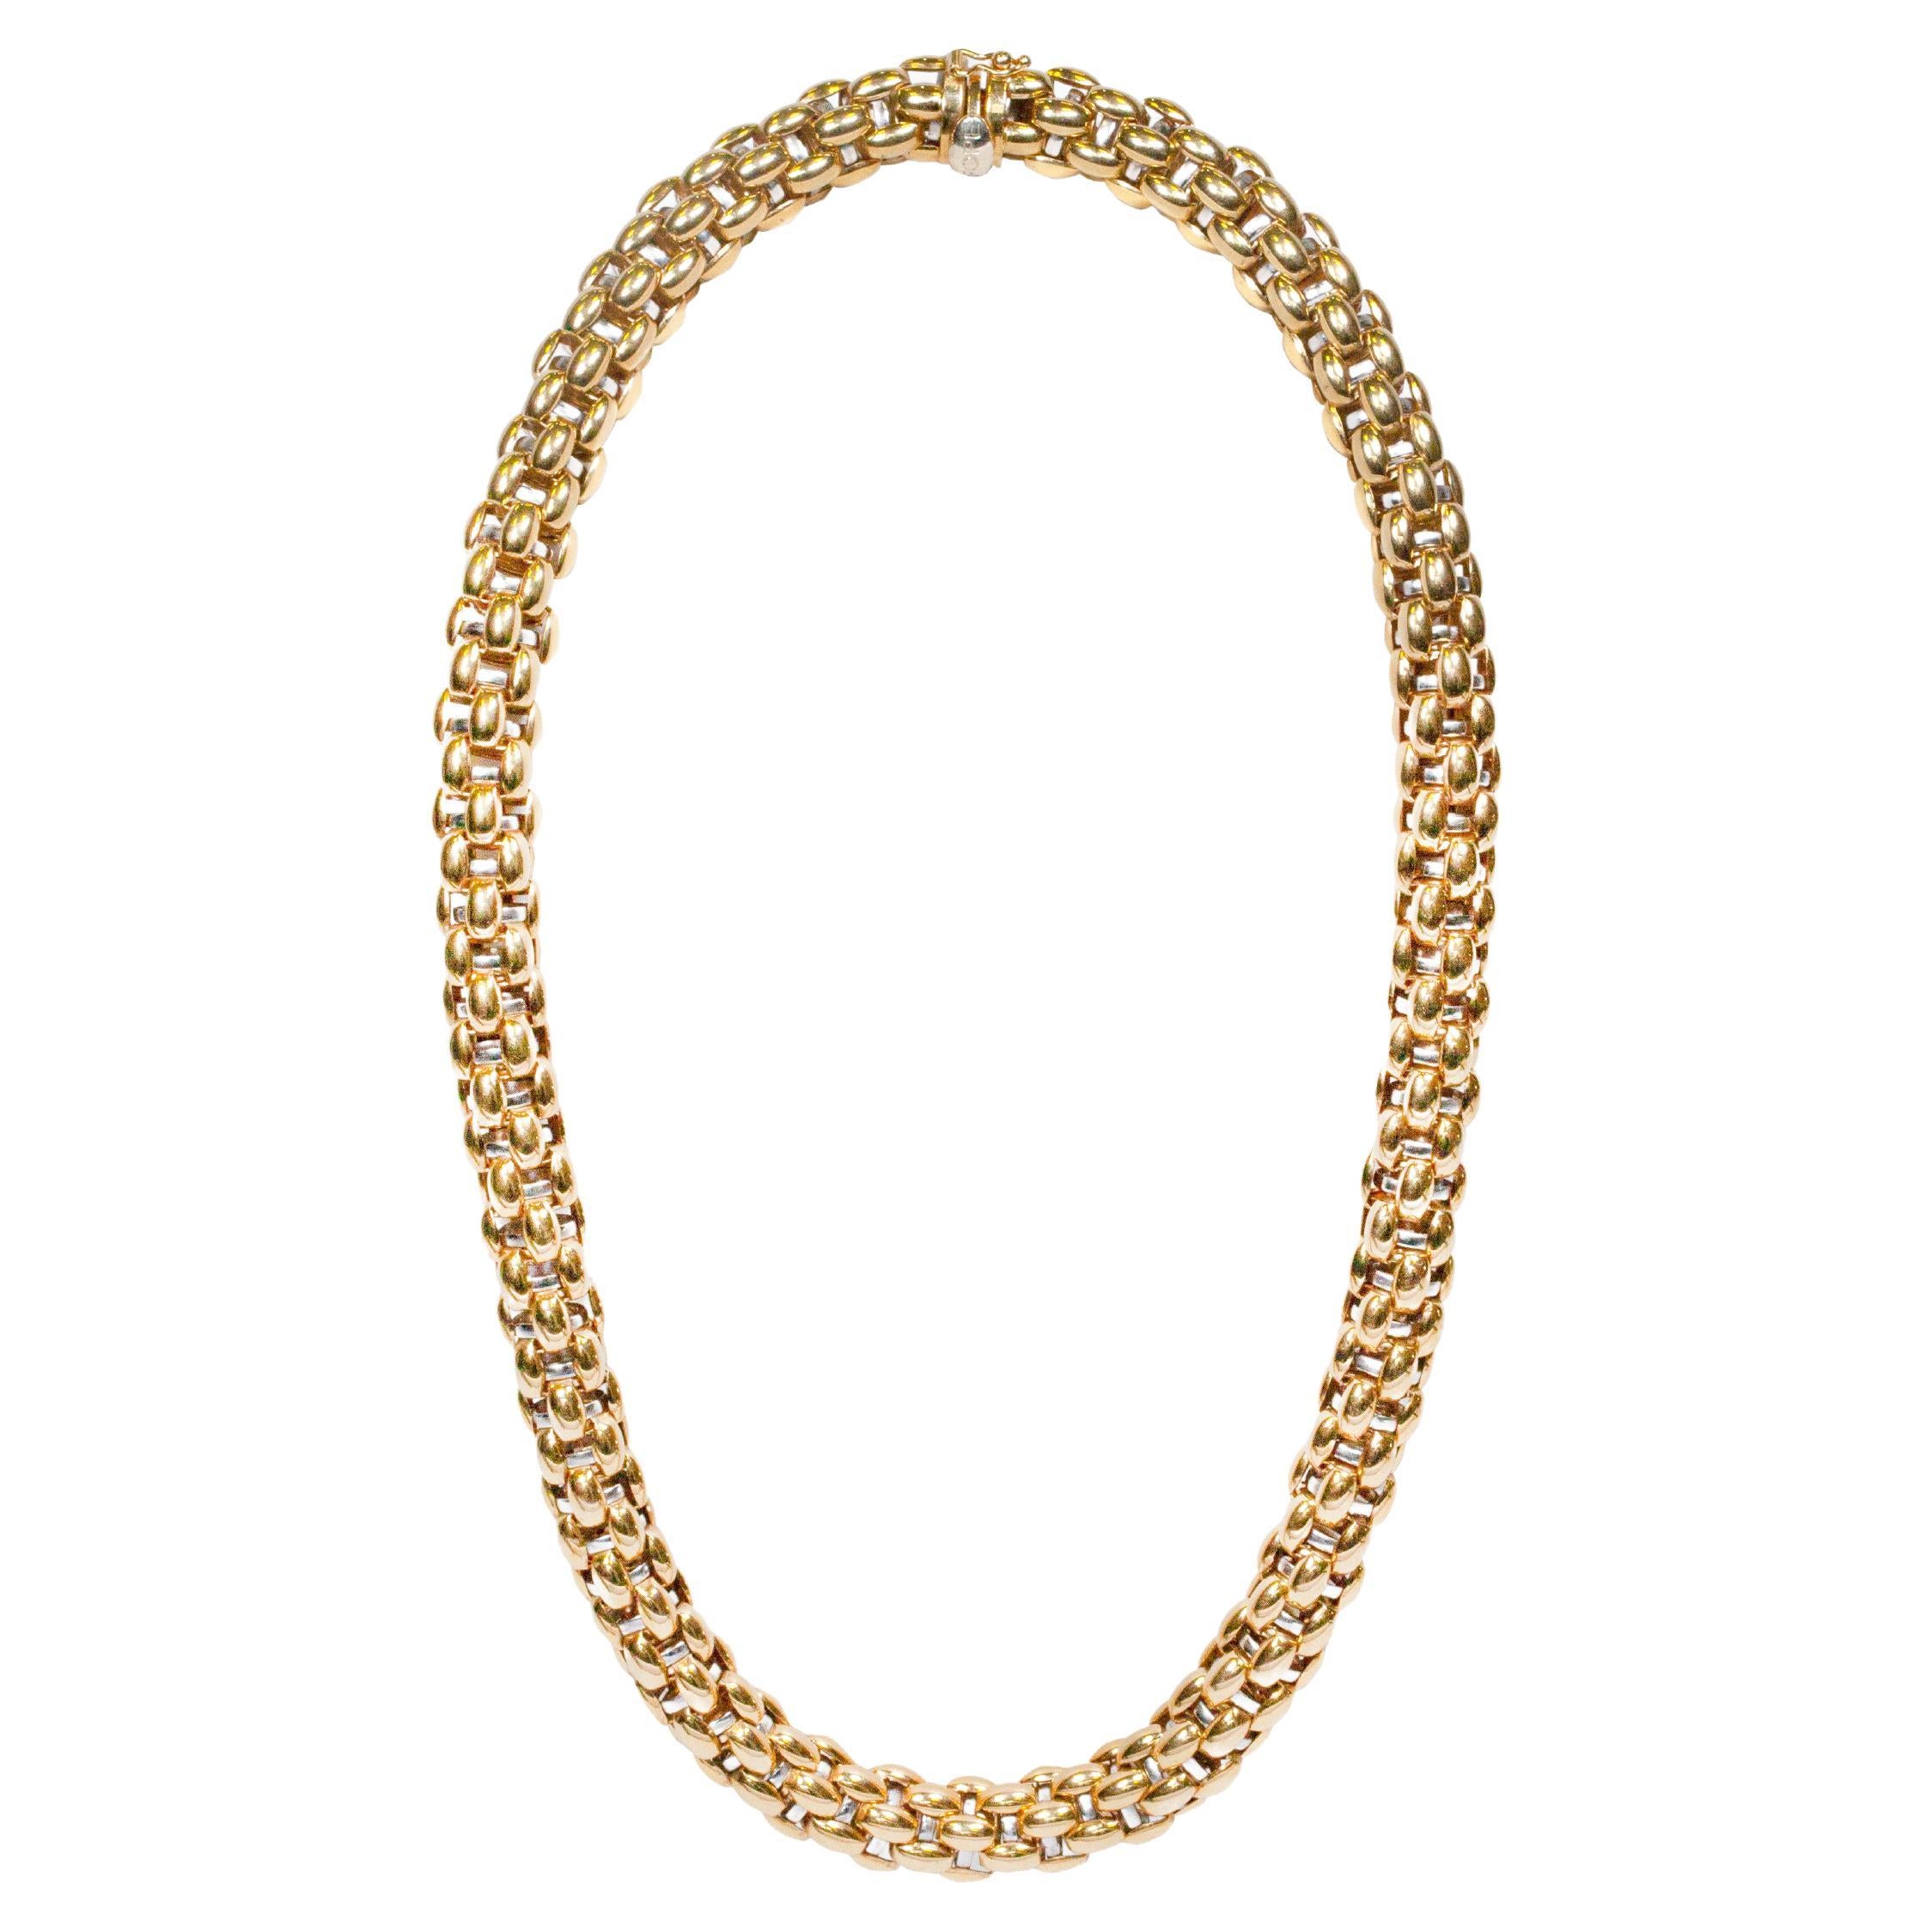 18 Carat Yellow and White Gold Woven FOPE Choker Necklace